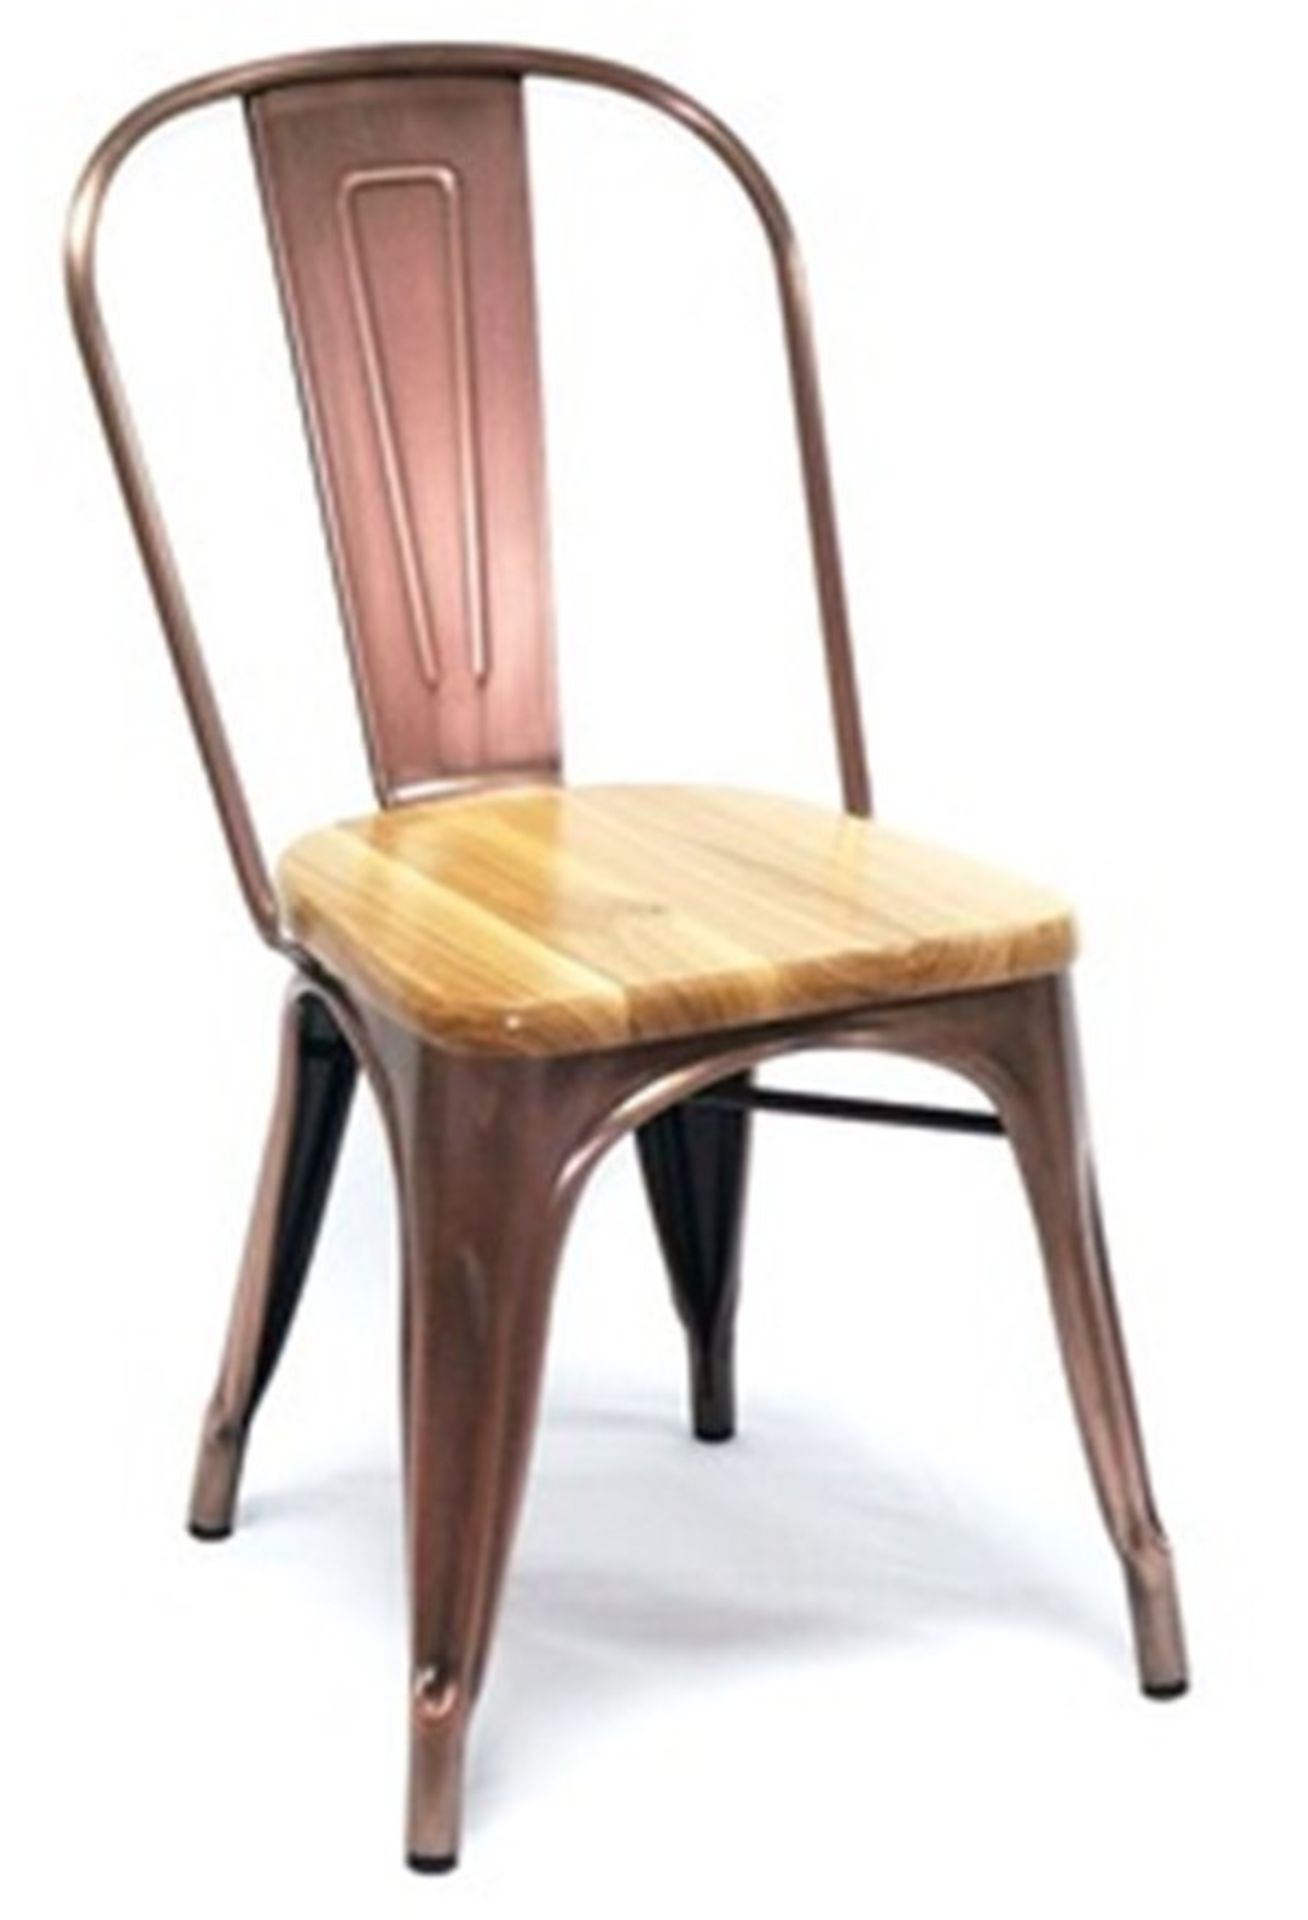 4 x Industrial Tolix Style Stackable Chairs With Armrests and Wooden Seats - Finish: COPPER - - Image 3 of 3